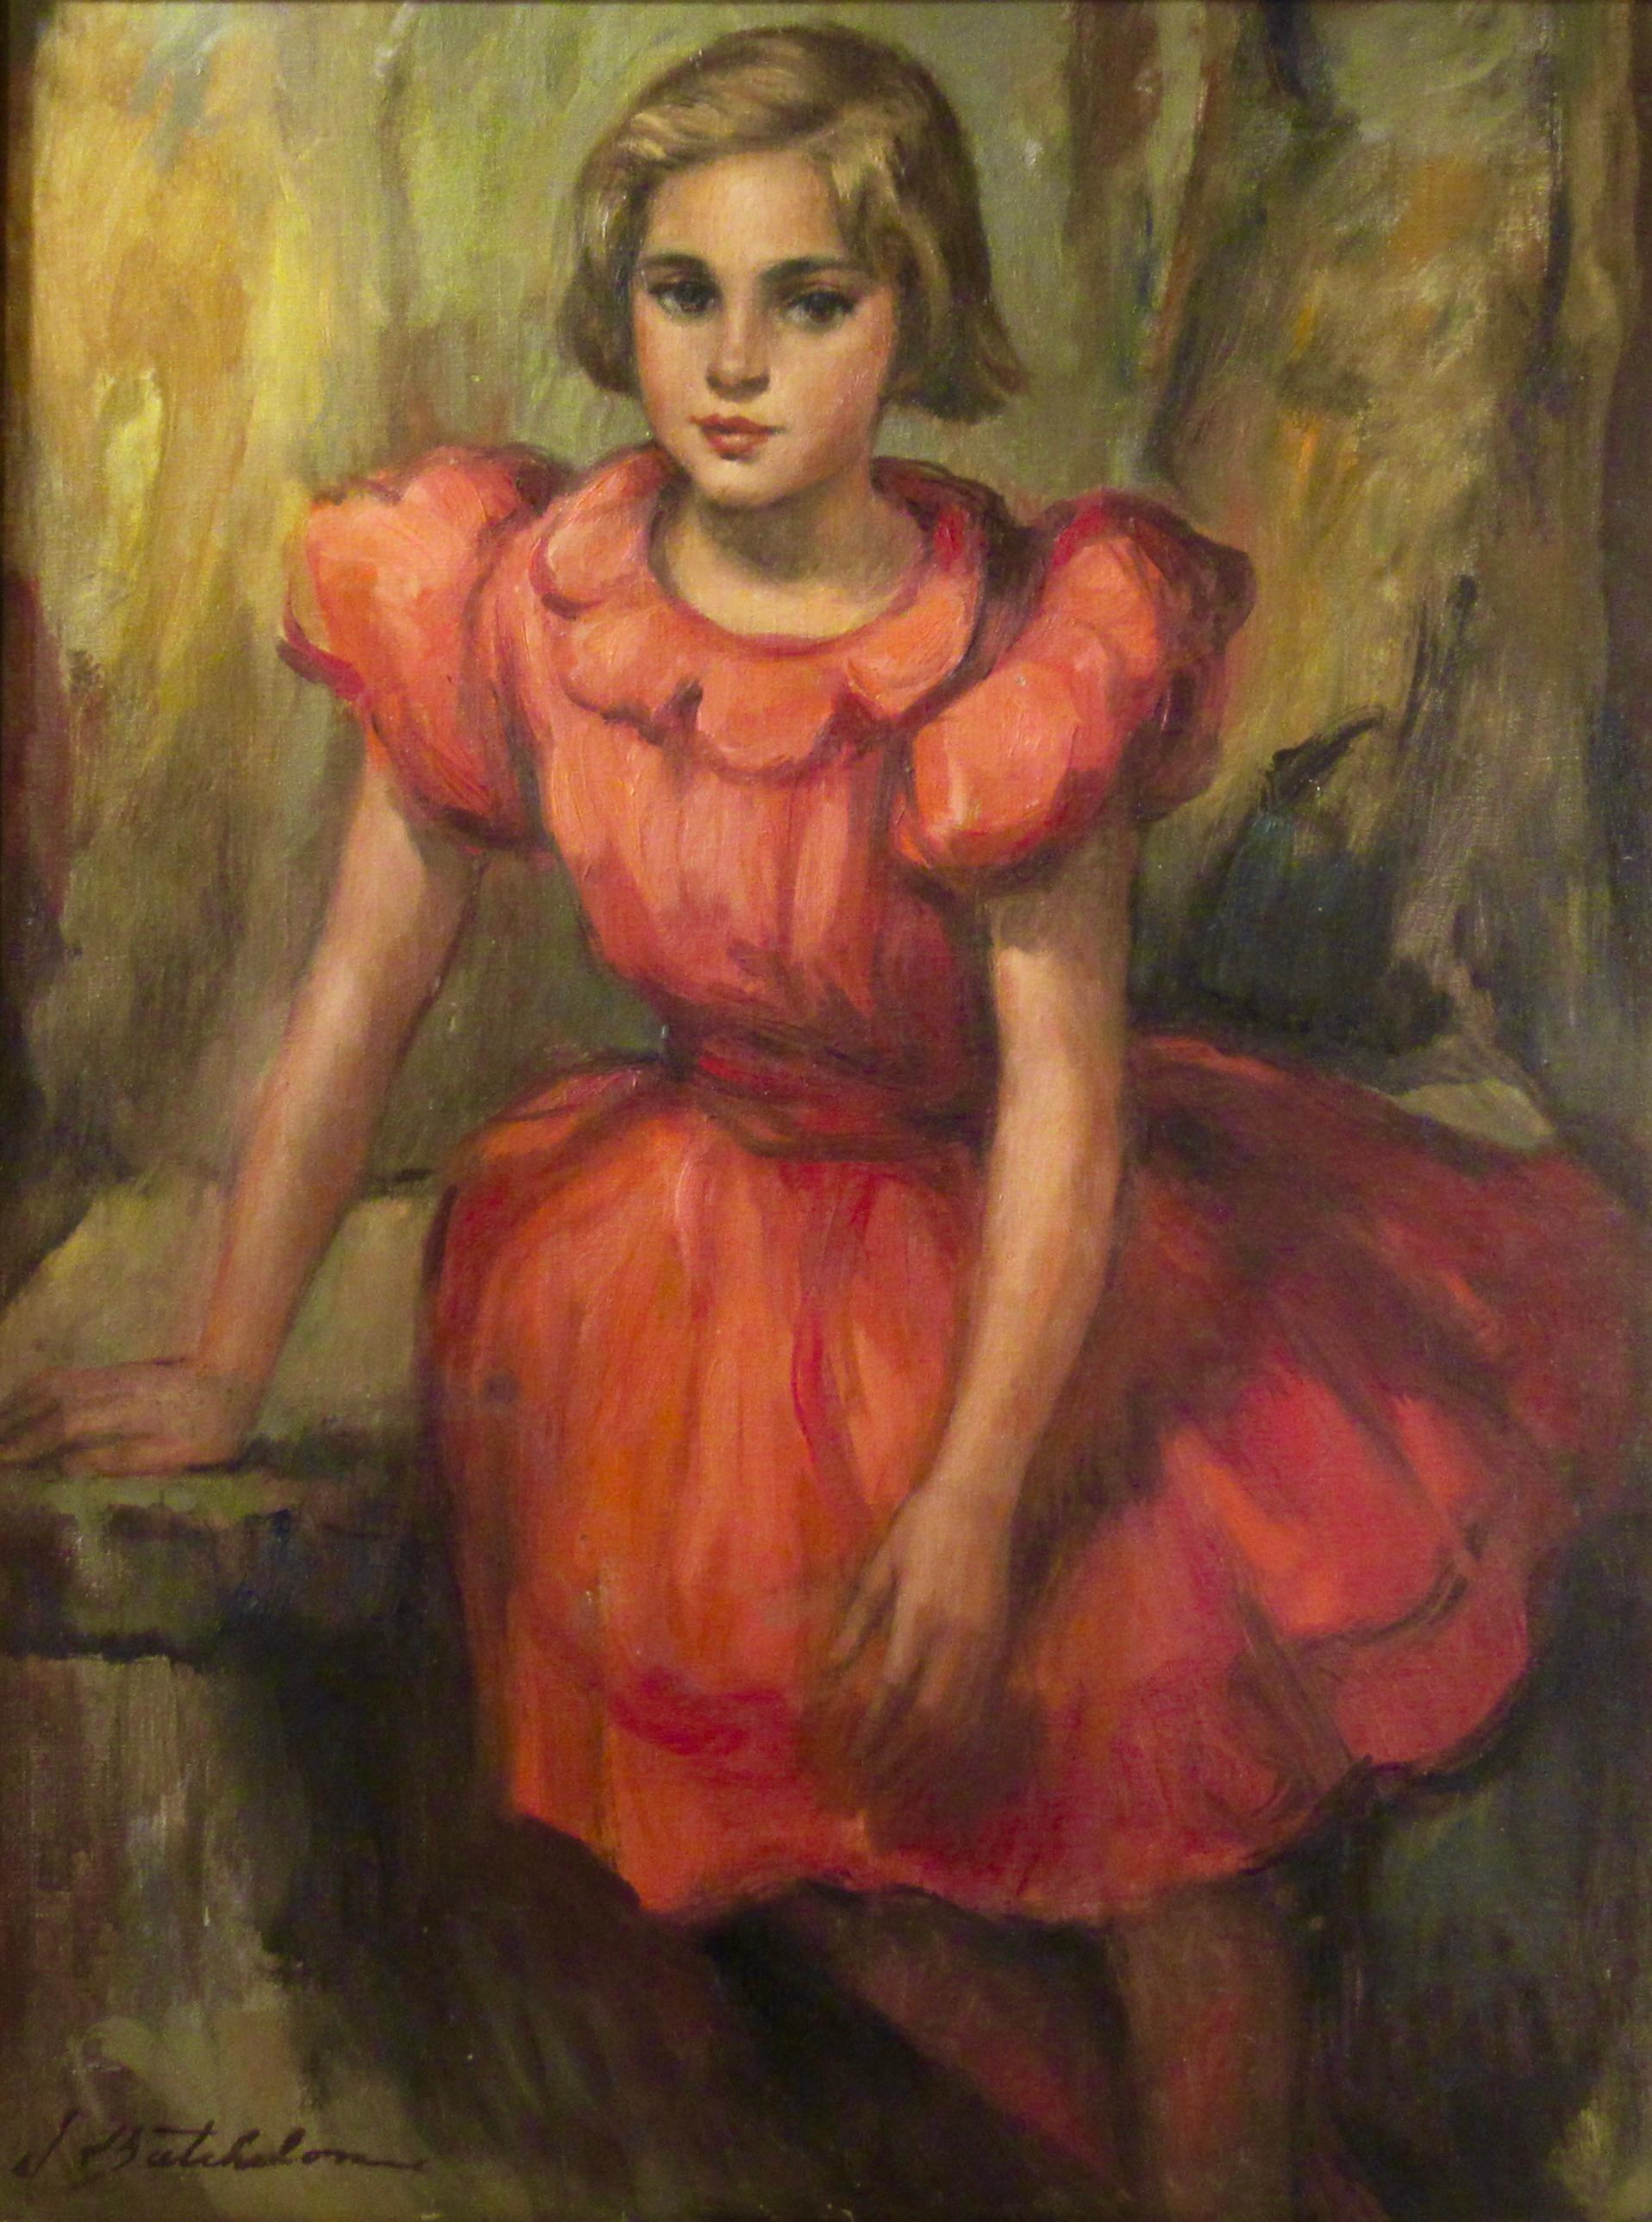 Young Girl Sitting on a Bench - Painting by JONATHAN DAVID BATCHELOR